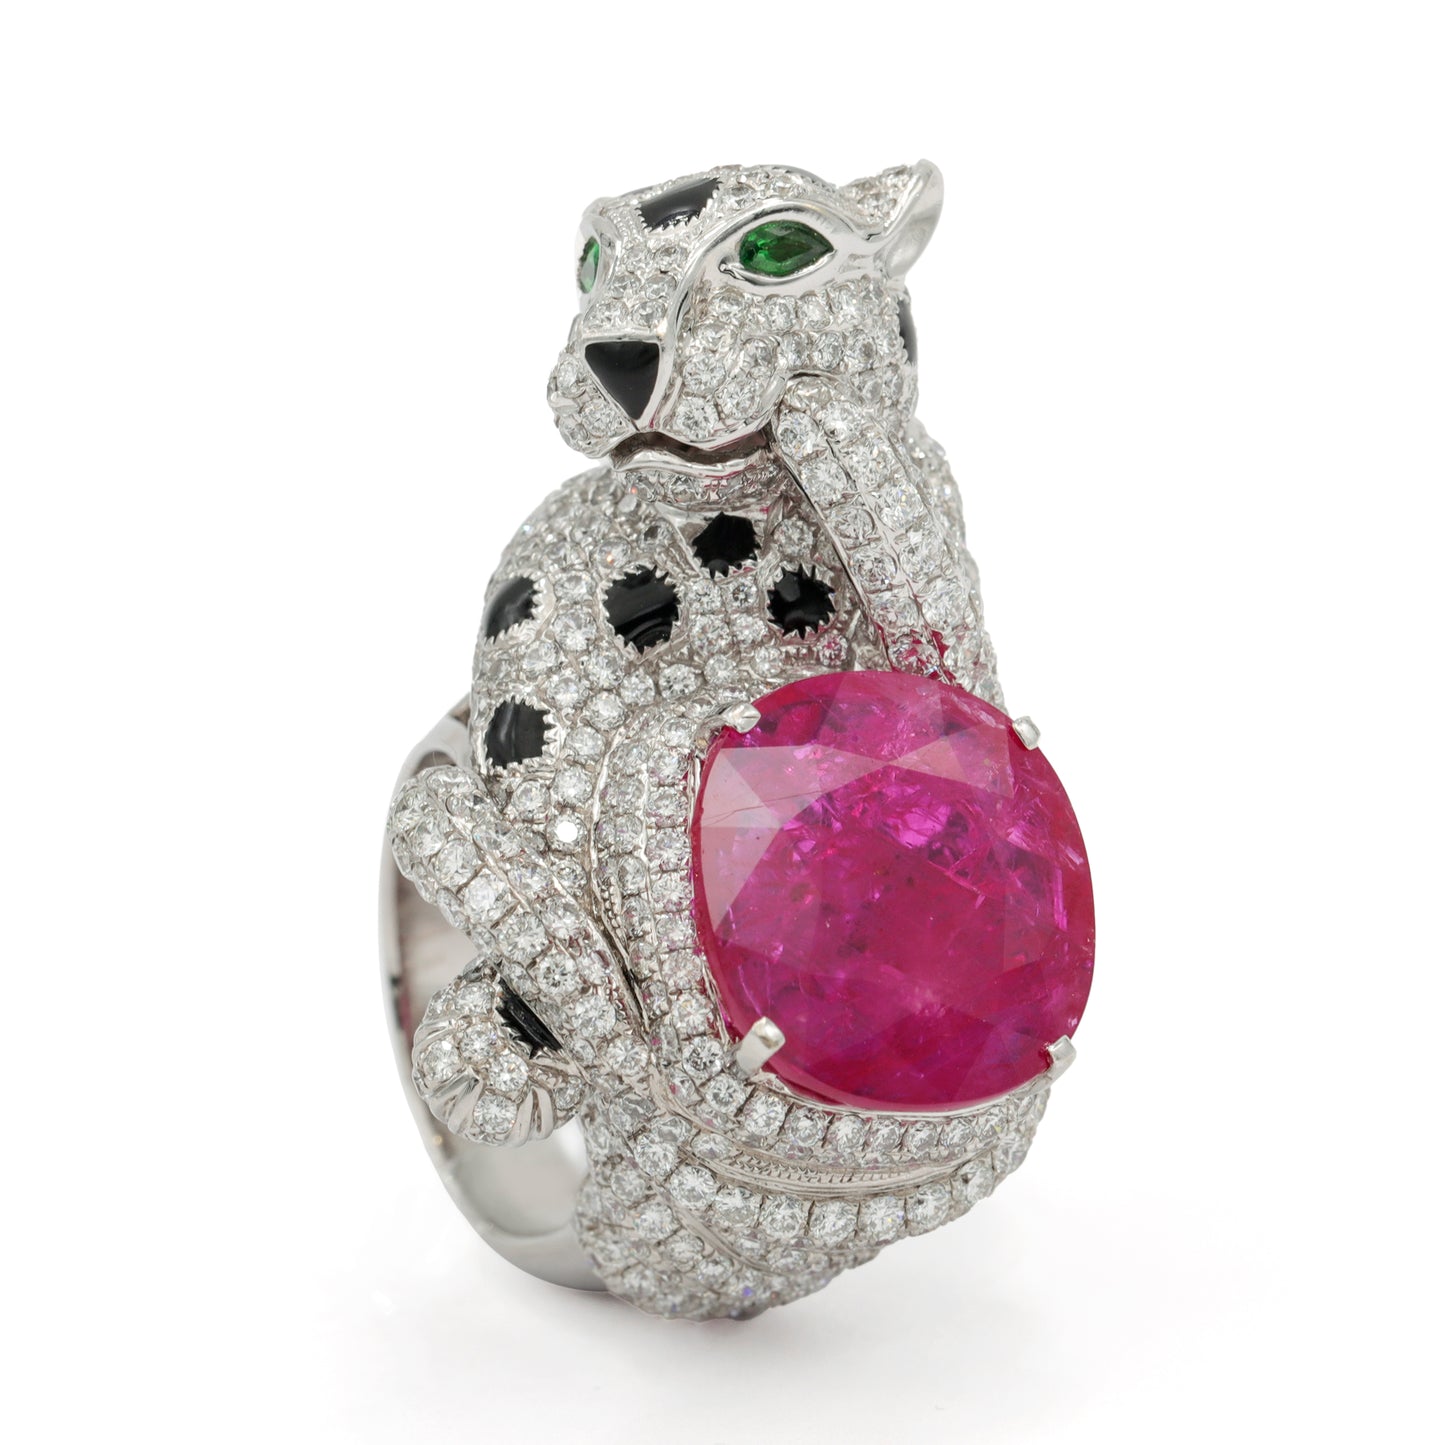 18k White Gold Panther Statement Ring with Large Ruby and Pave Diamonds